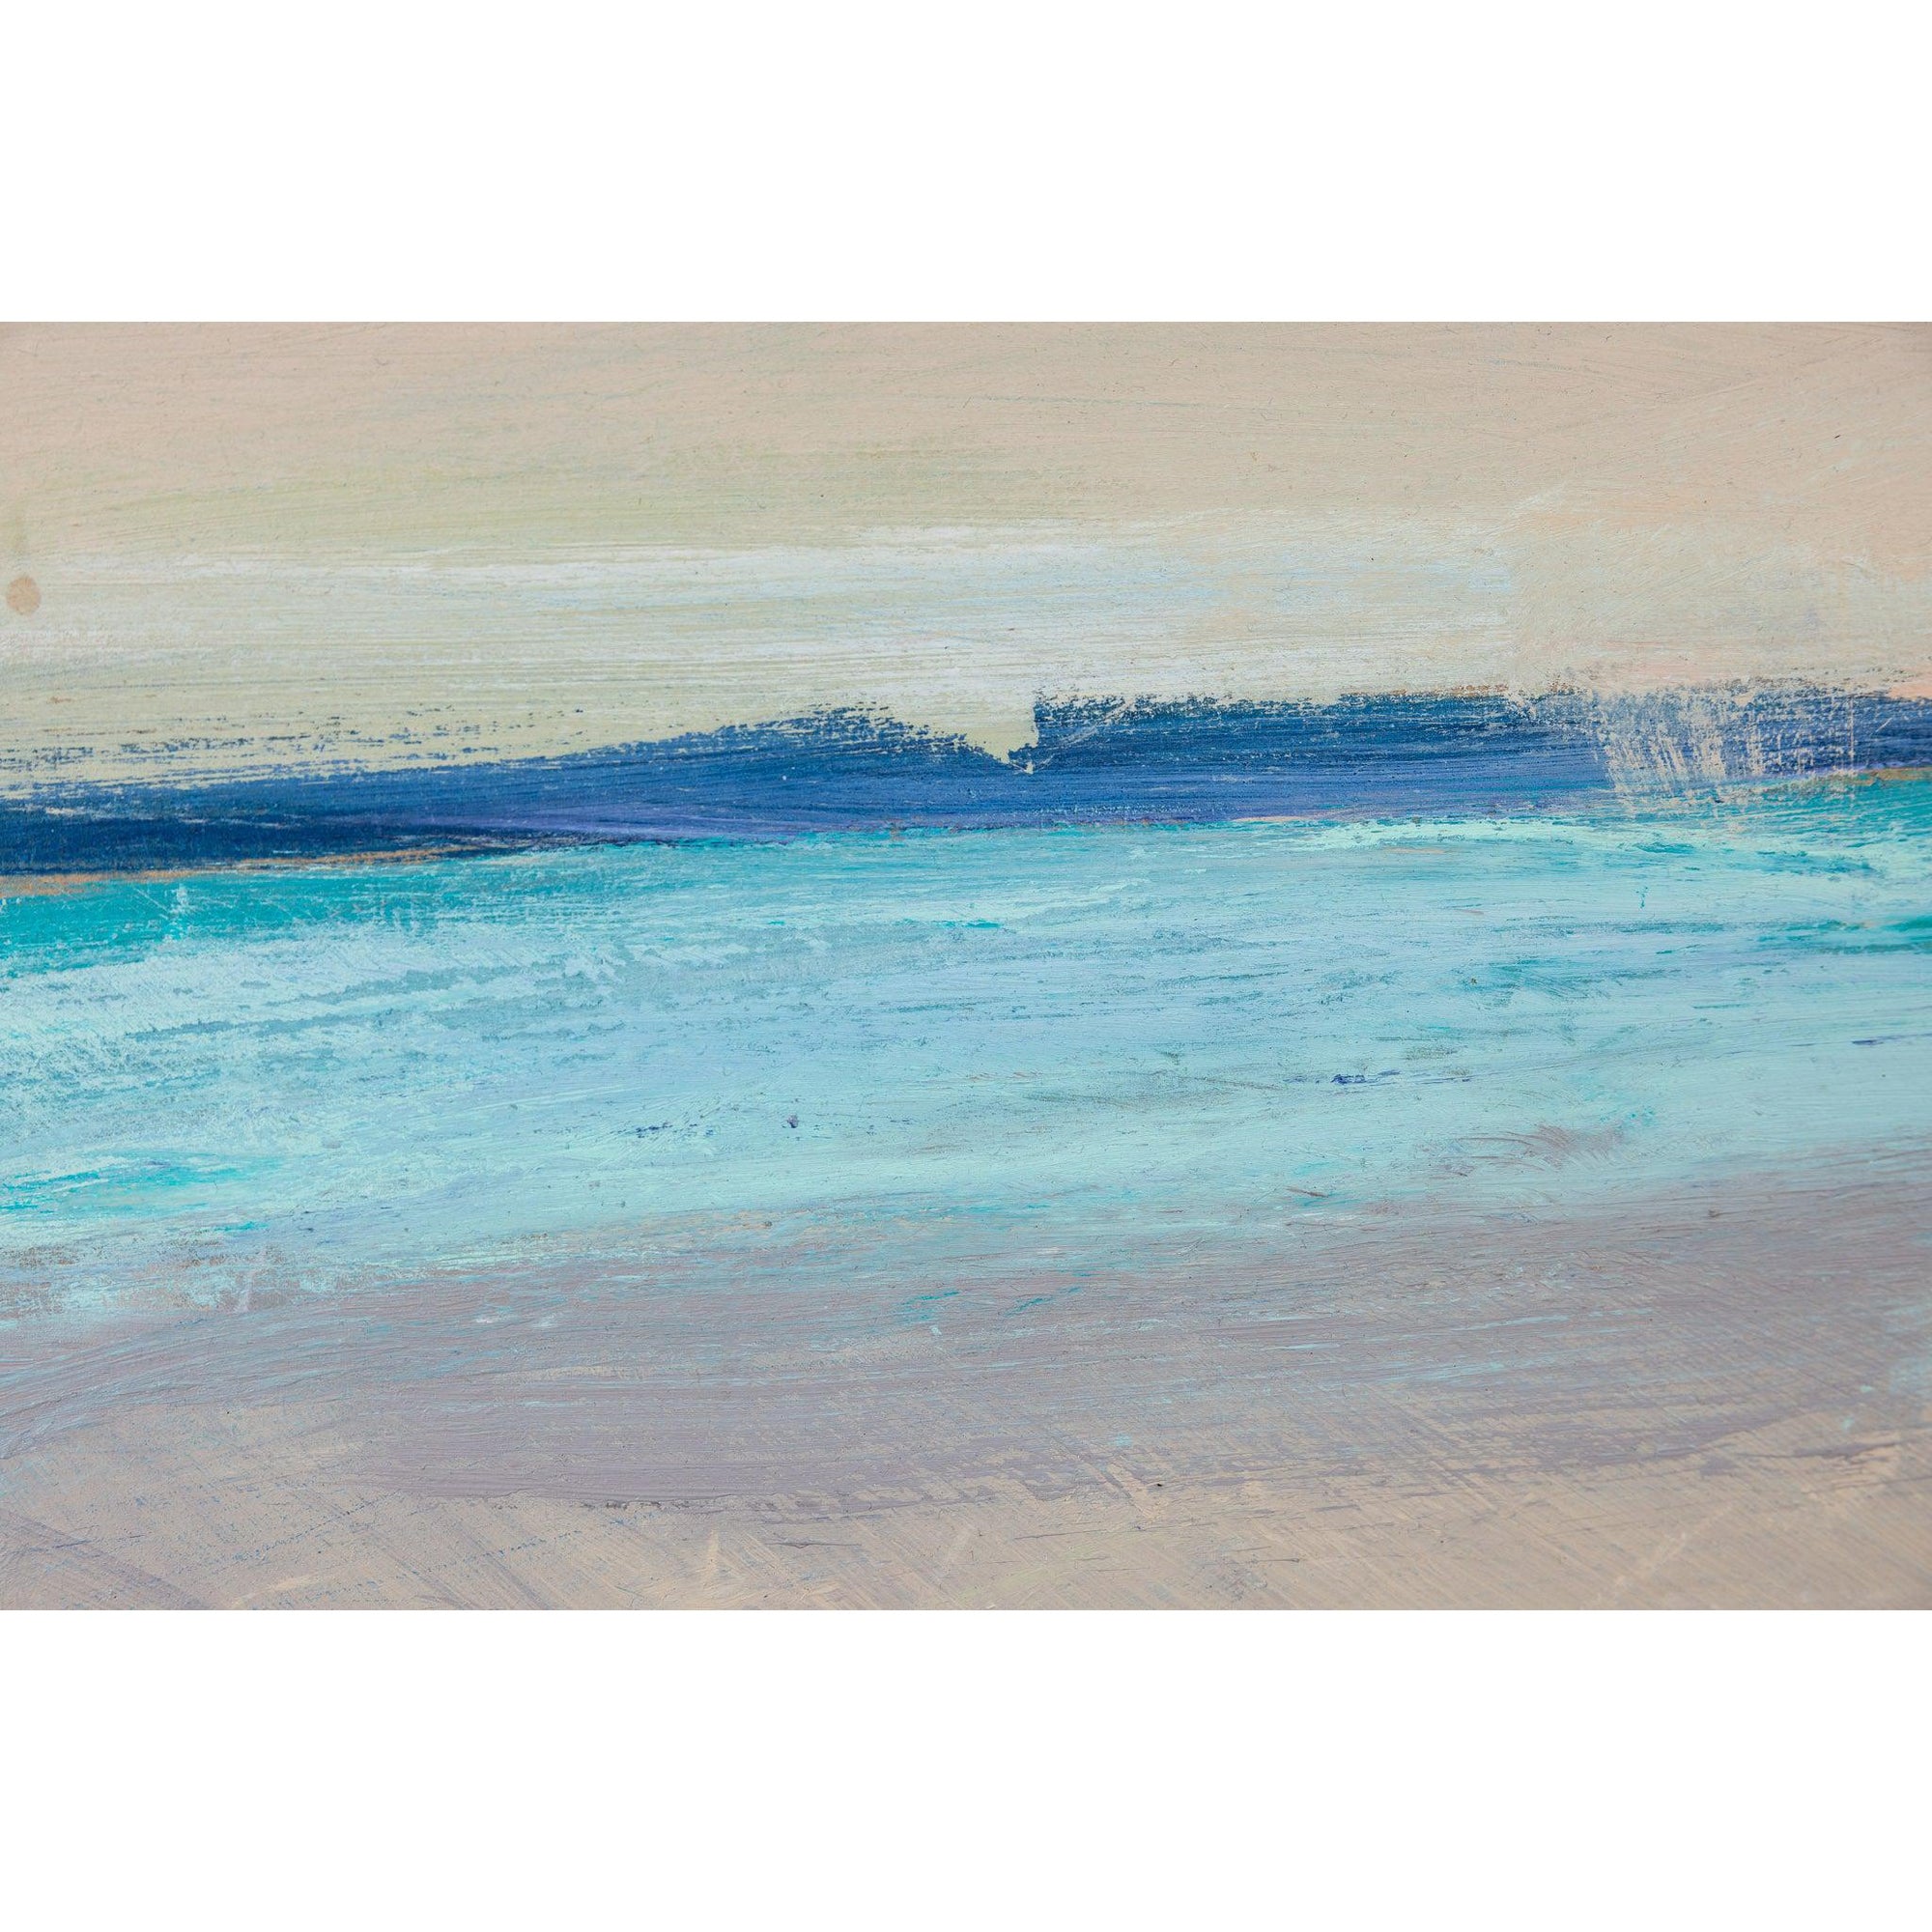 'Summer Glow' mixed media framed original by Alex Yarlett, available at Padstow Gallery, Cornwall